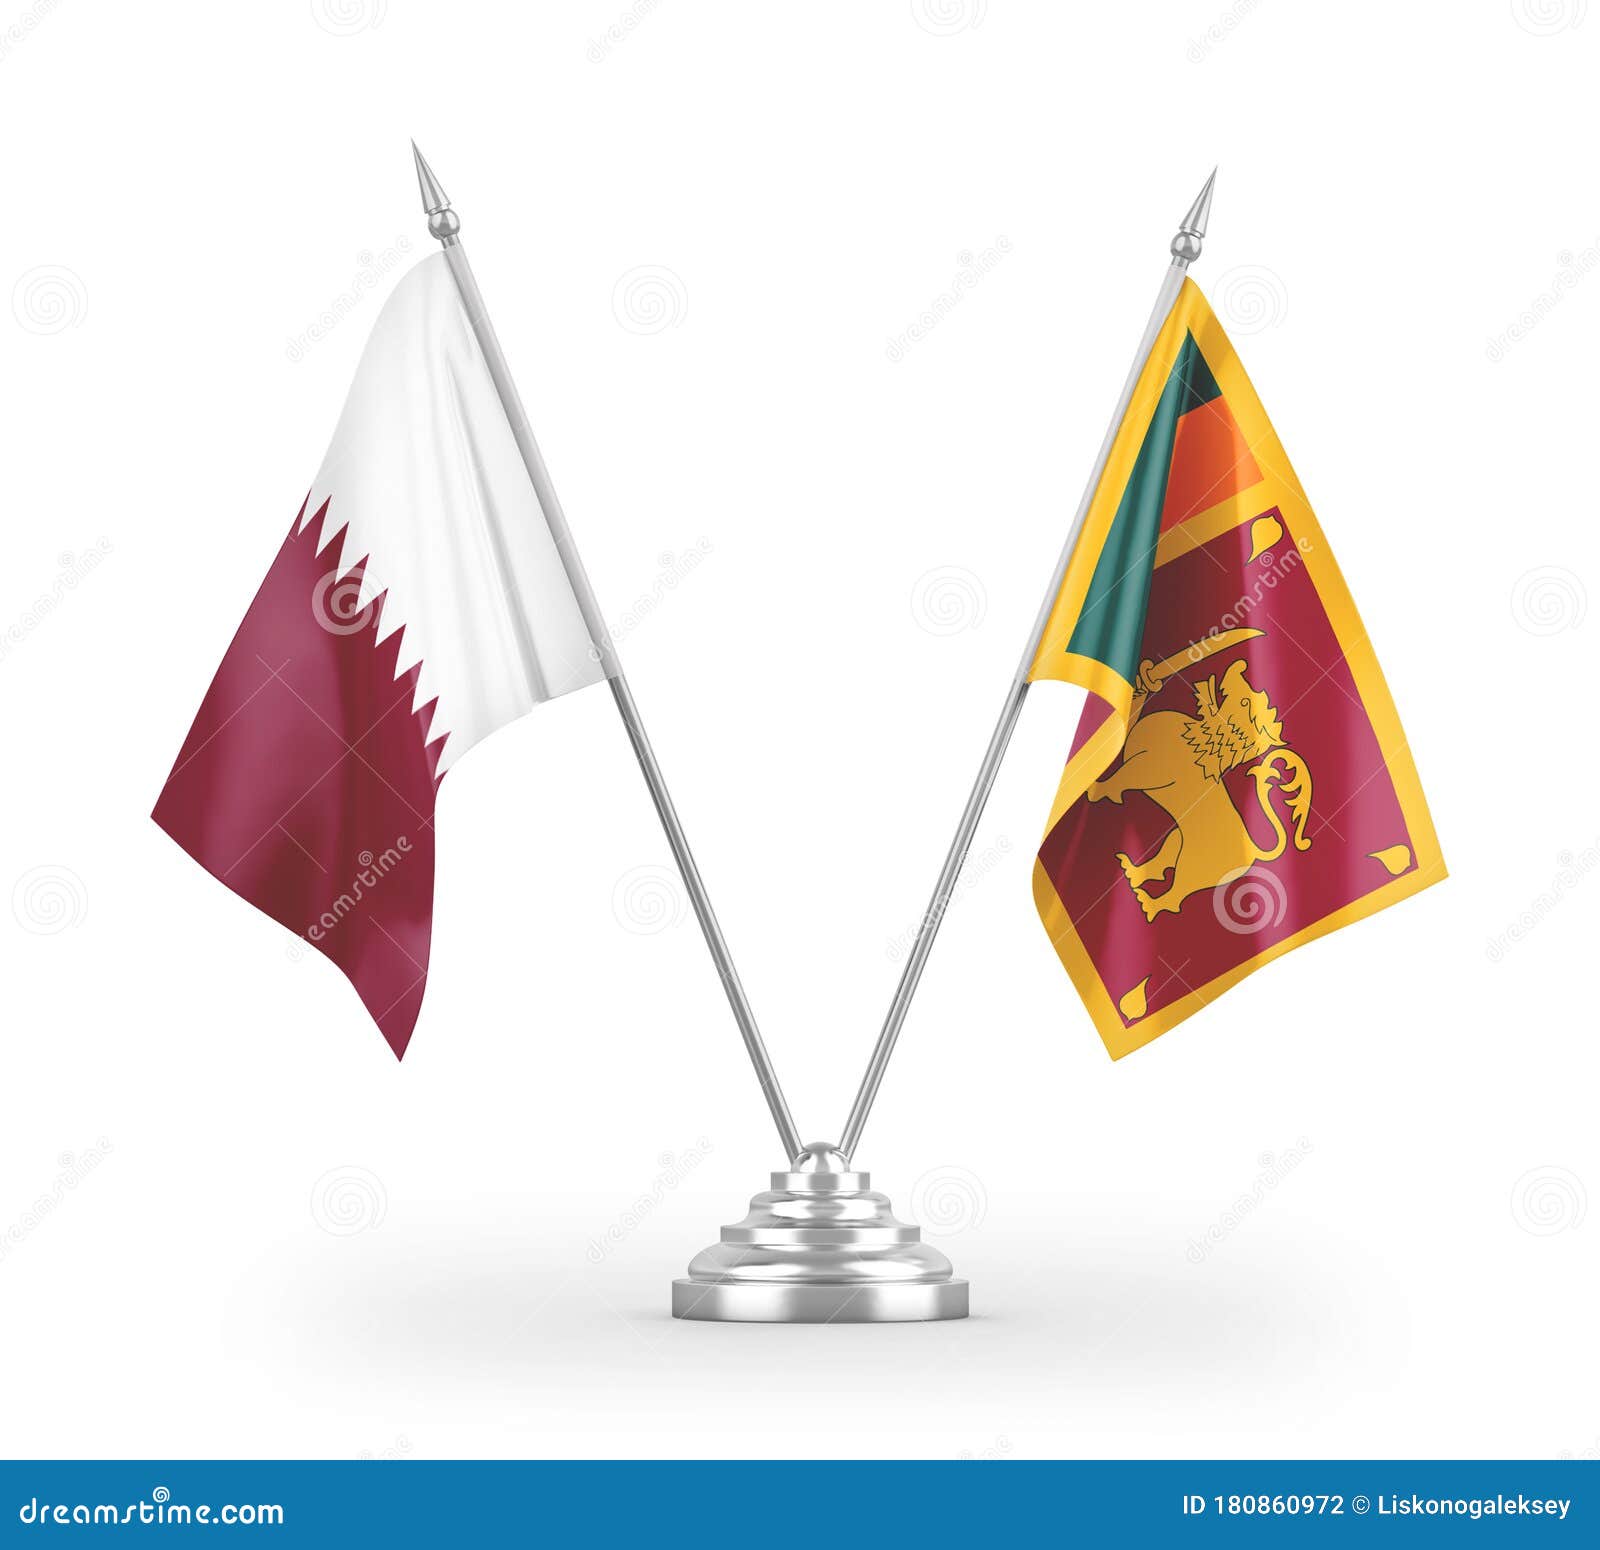 Economic crisis: Govt seeks early talks with Qatar Sri-lanka-qatar-table-flags-isolated-white-d-rendering-sri-lanka-qatar-table-flags-isolated-white-background-d-180860972